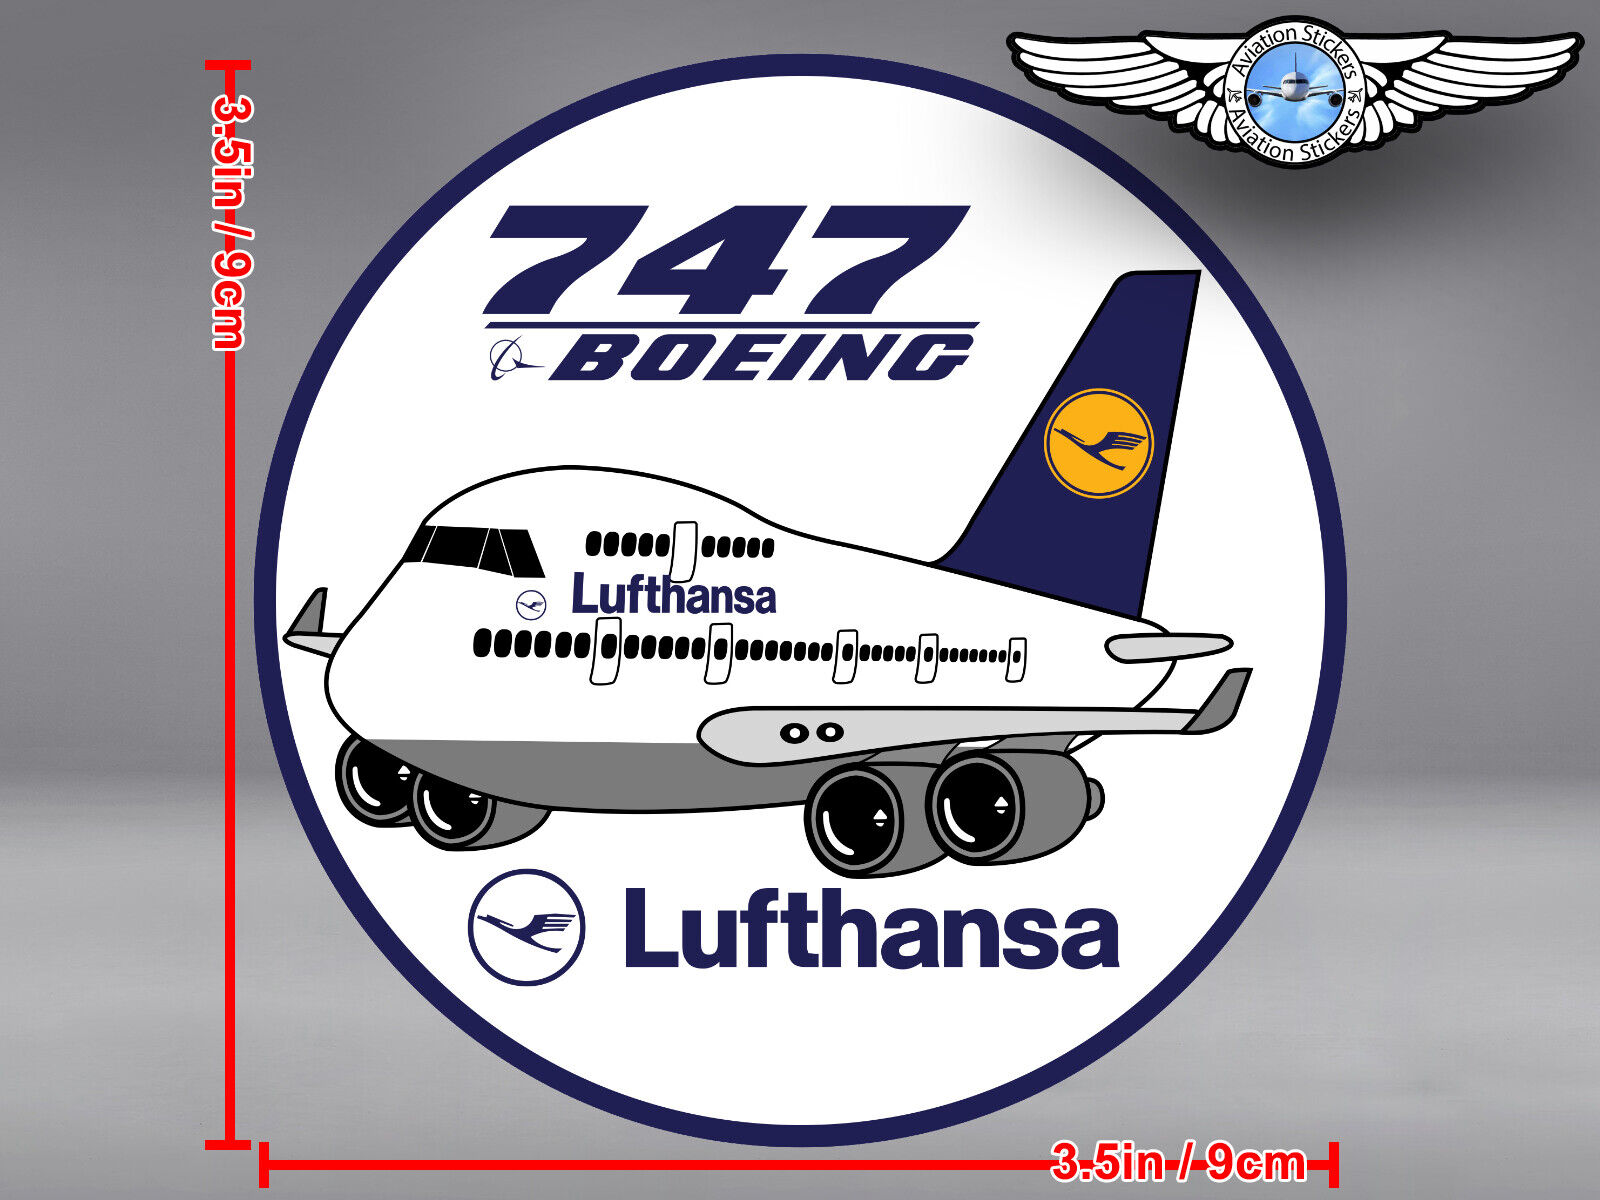 LUFTHANSA PUDGY BOEING B747 B 747 IN OLD LIVERY DECAL / STICKER